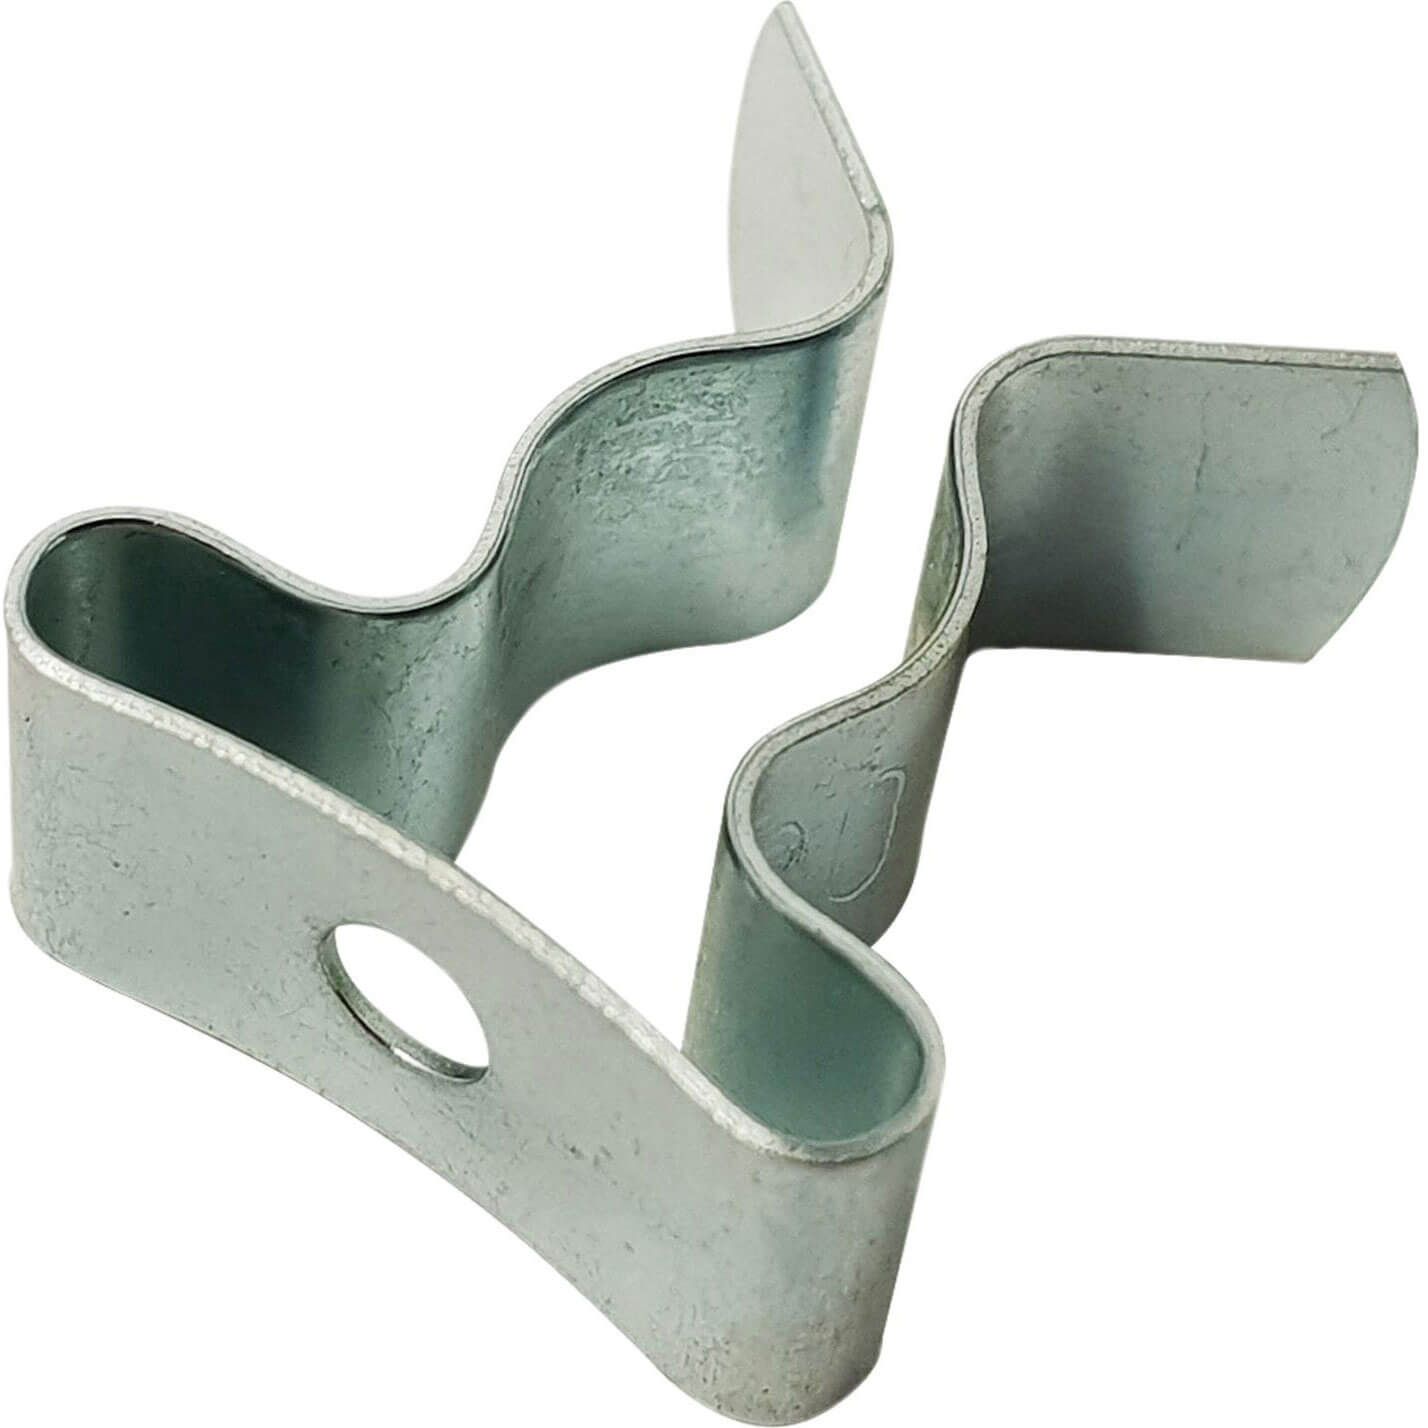 Image of Forgefix Zinc Plated Tool Clips 6mm Pack of 25